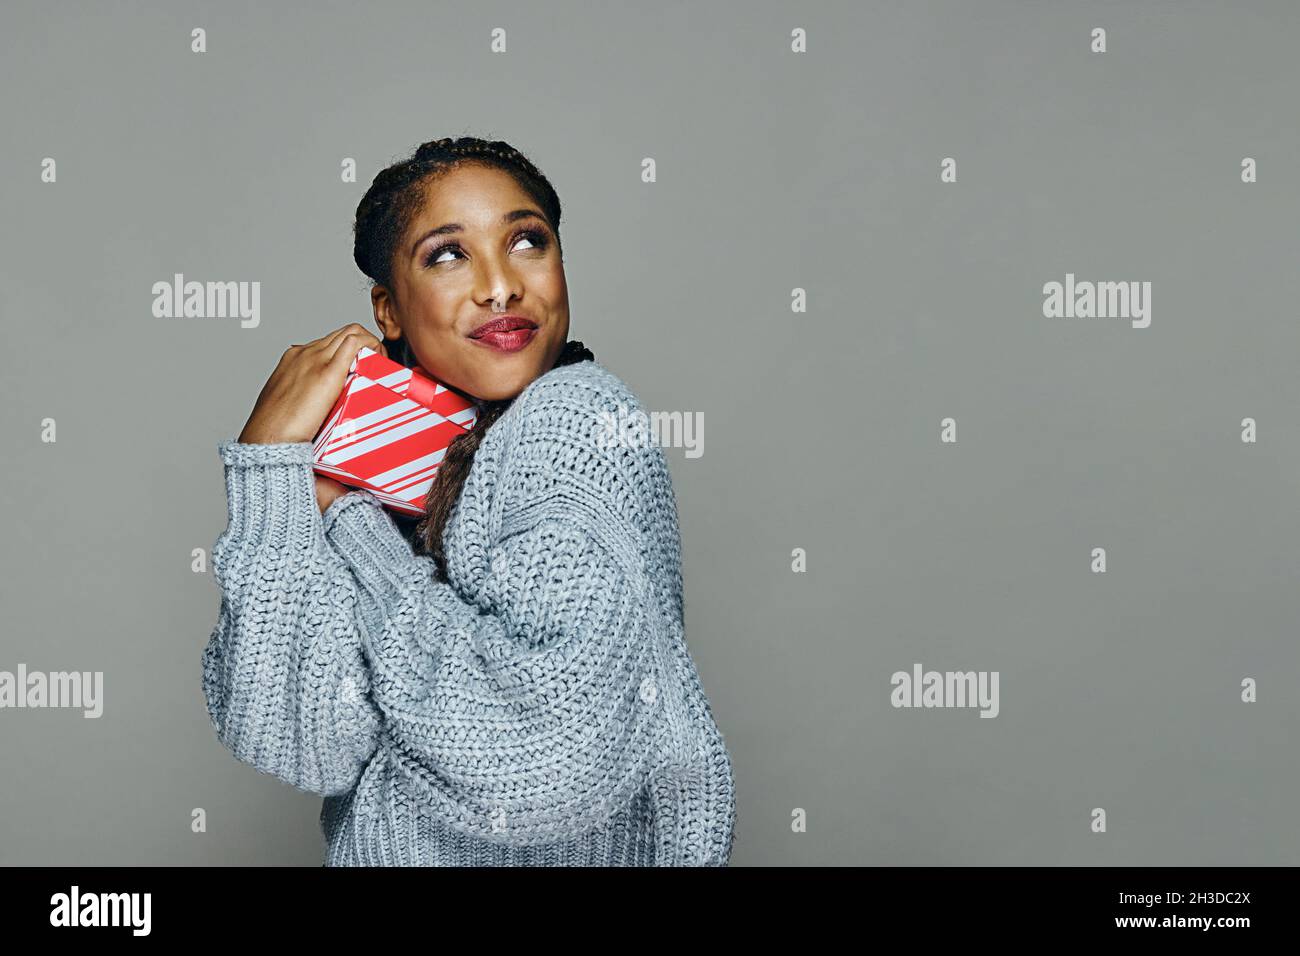 Happy attractive young woman in sweater hugging tight Christmas present while looking up against gray background Stock Photo